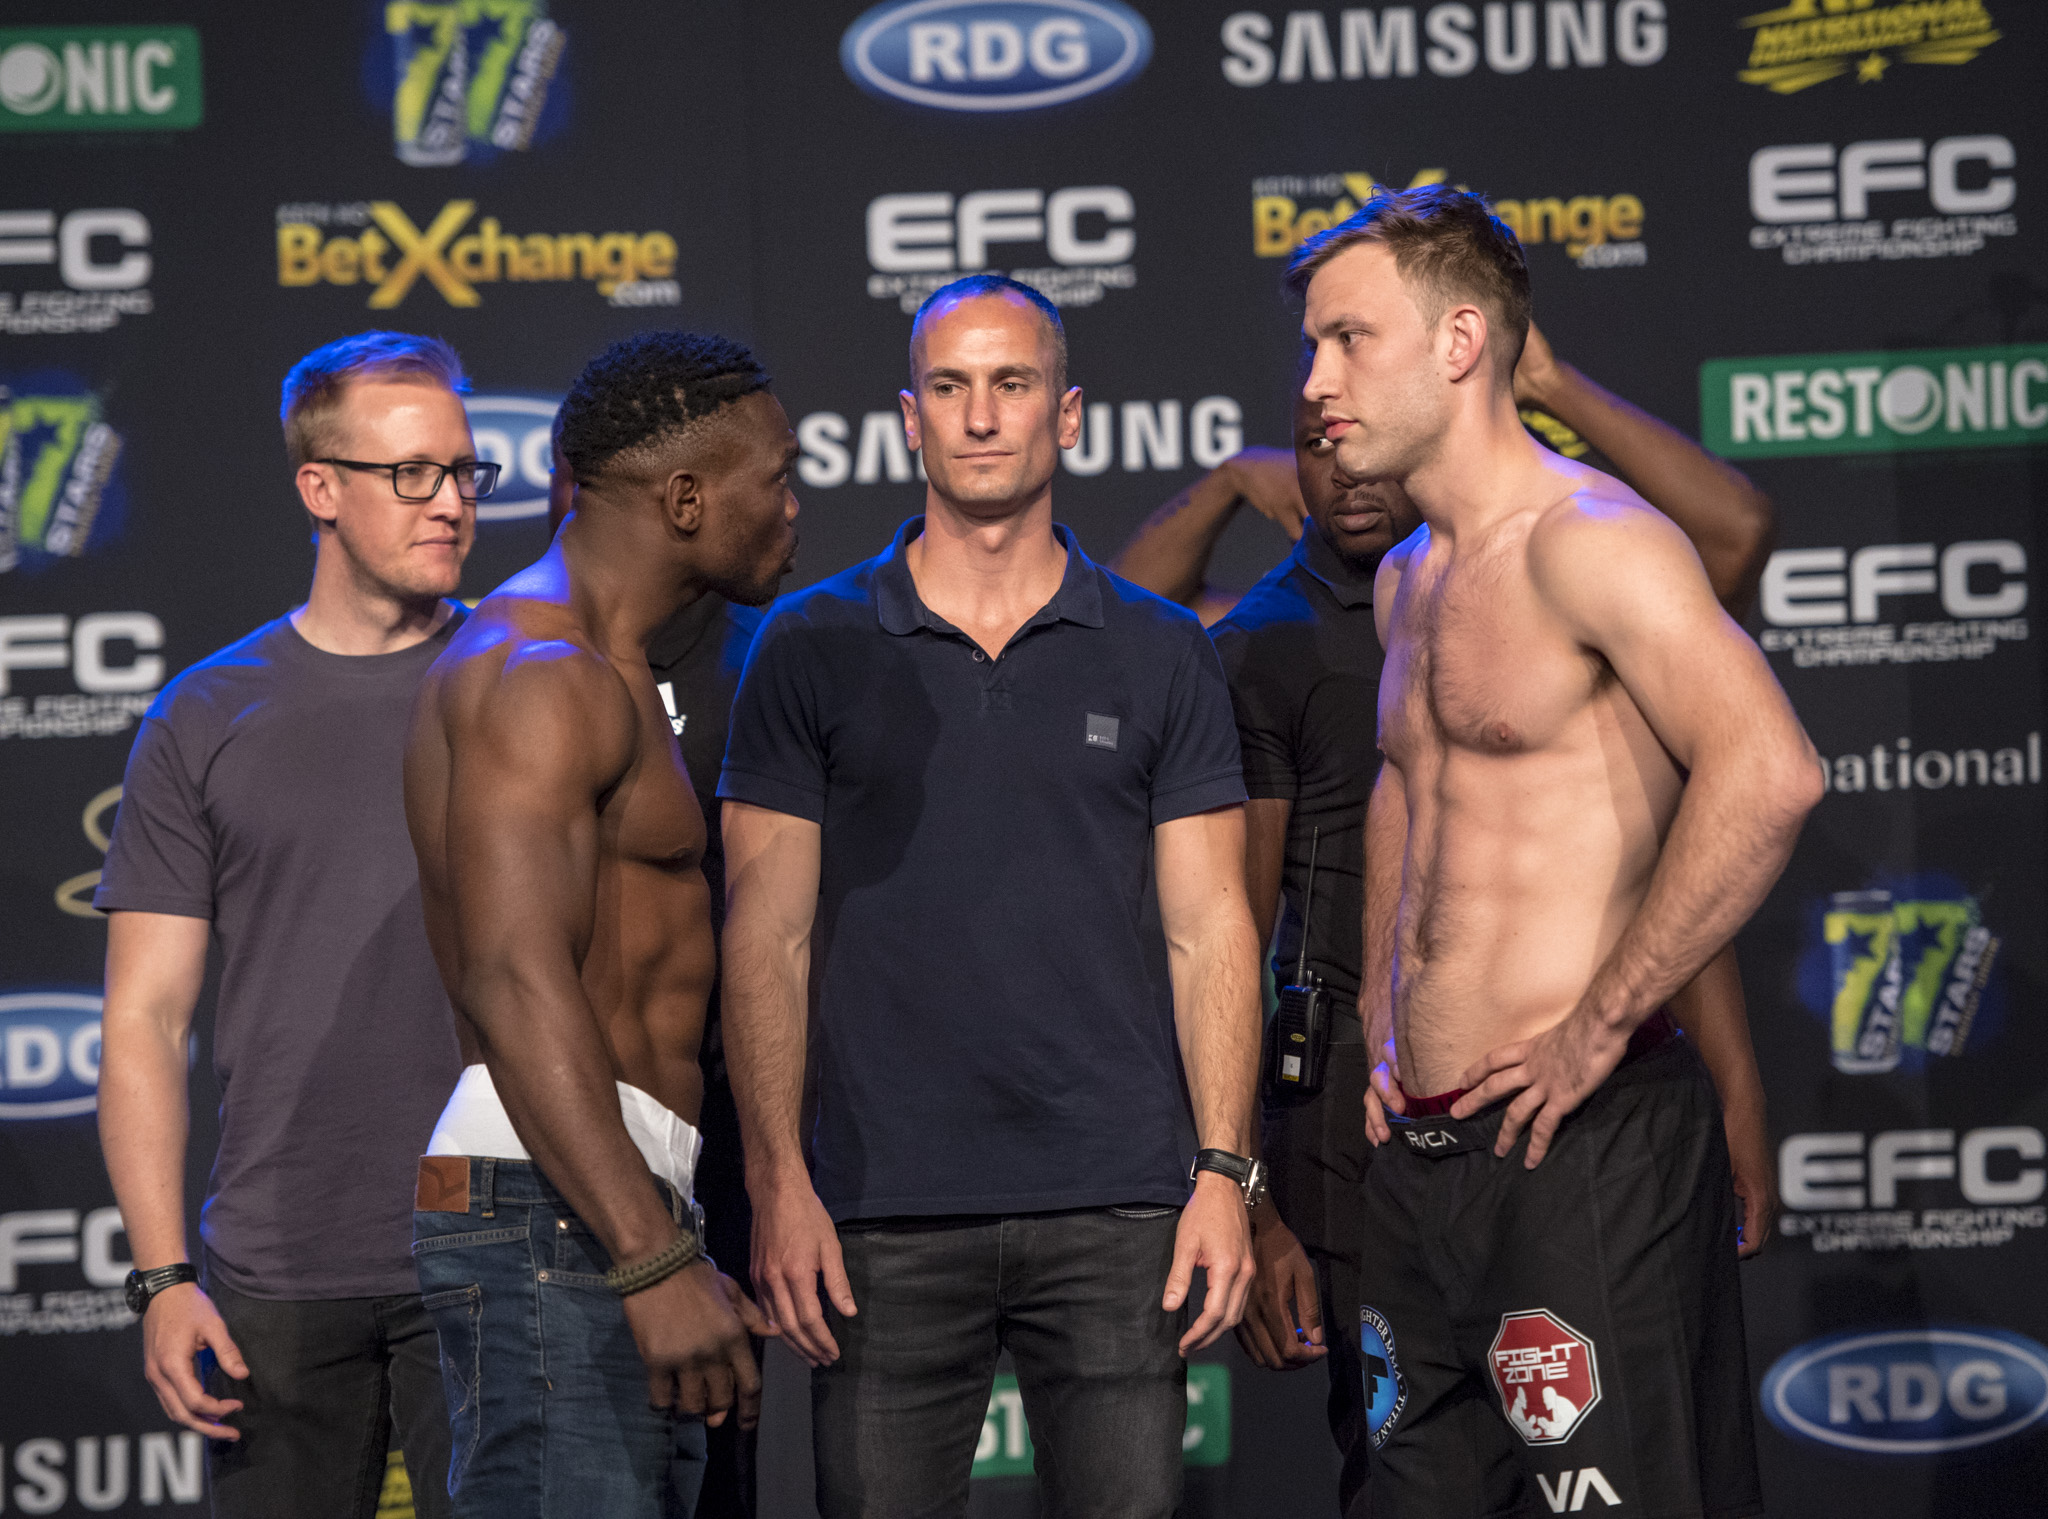 JOHANNESBURG, SOUTH AFRICA - NOVEMBER 03:  during the Medical Examination and Weigh In of EFC 65 at Carnival City on November 03, 2017 in Johannesburg, South Africa. (Photo by Anton Geyser/EFC Worldwide/Gallo Images)